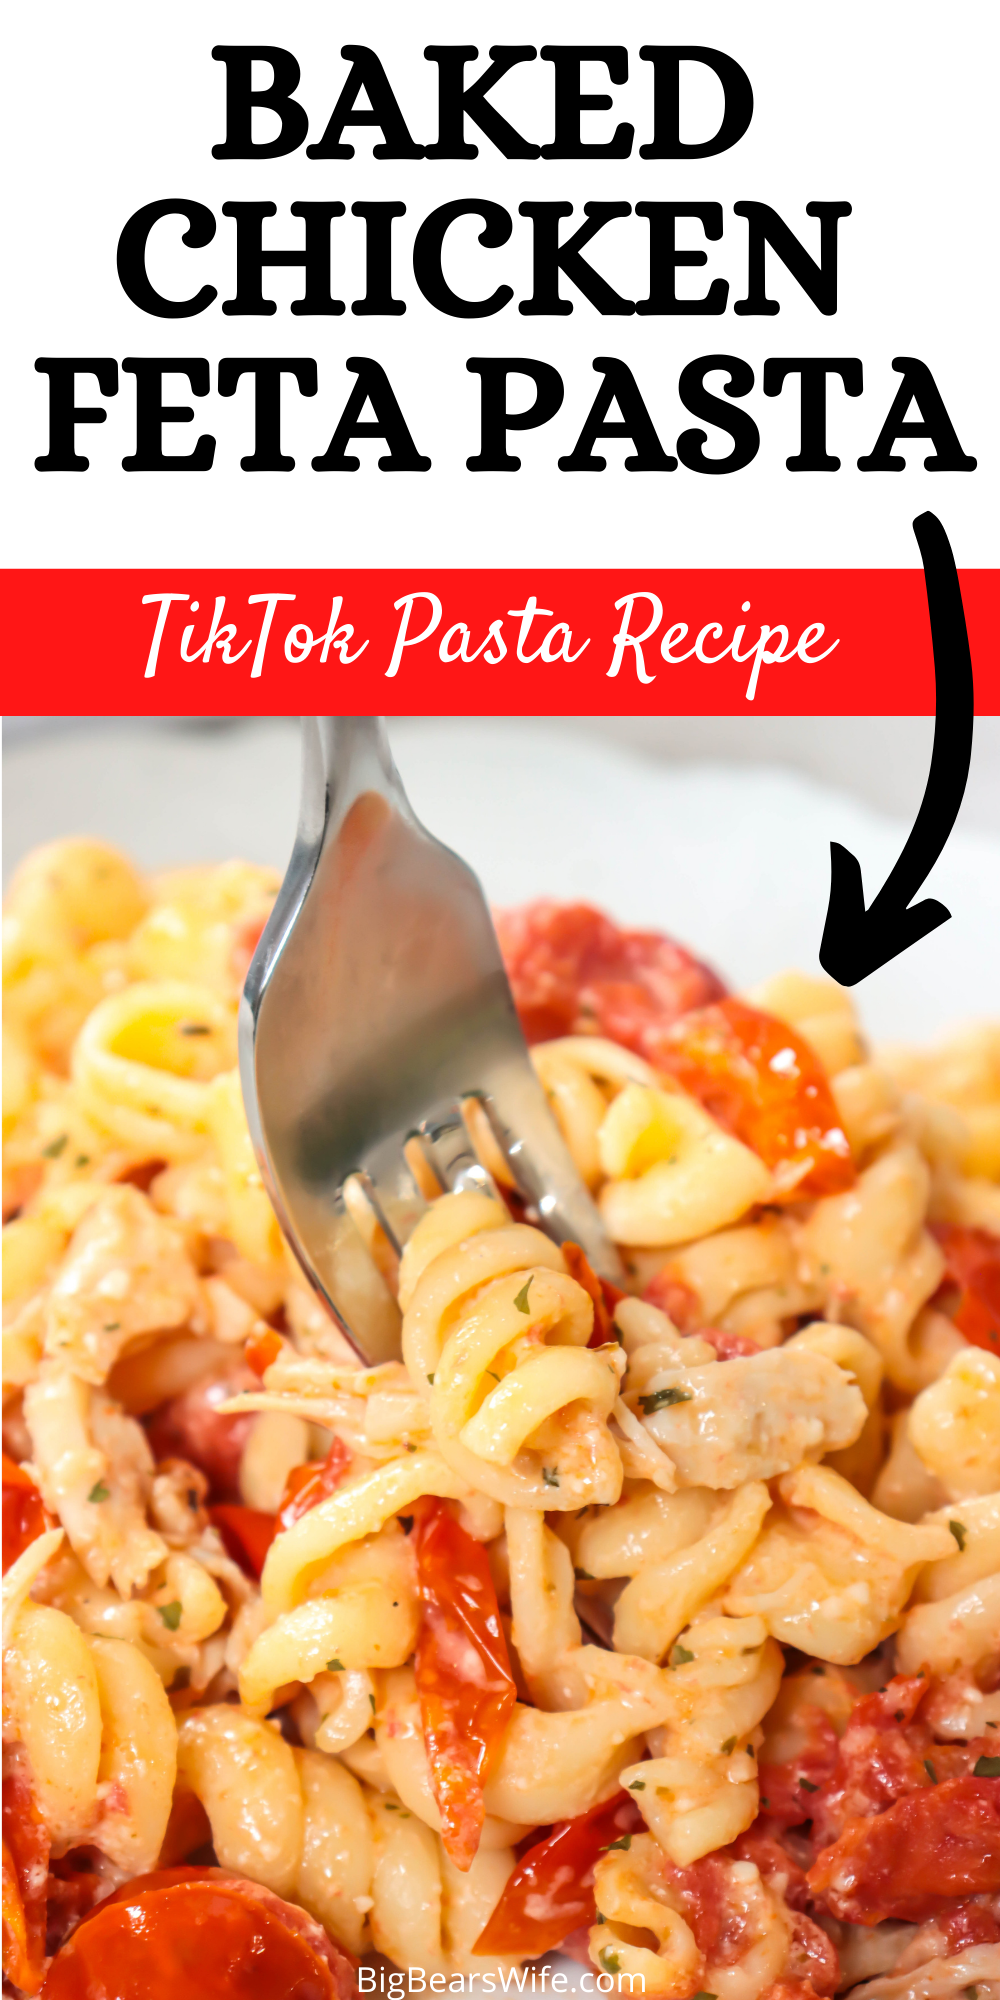 A little chicken twist on the TikTok famous Chicken Feta Pasta is what we're servings up today! This  Baked Chicken Feta Pasta is delicious and hardly takes any work in the kitchen to toss together!  via @bigbearswife